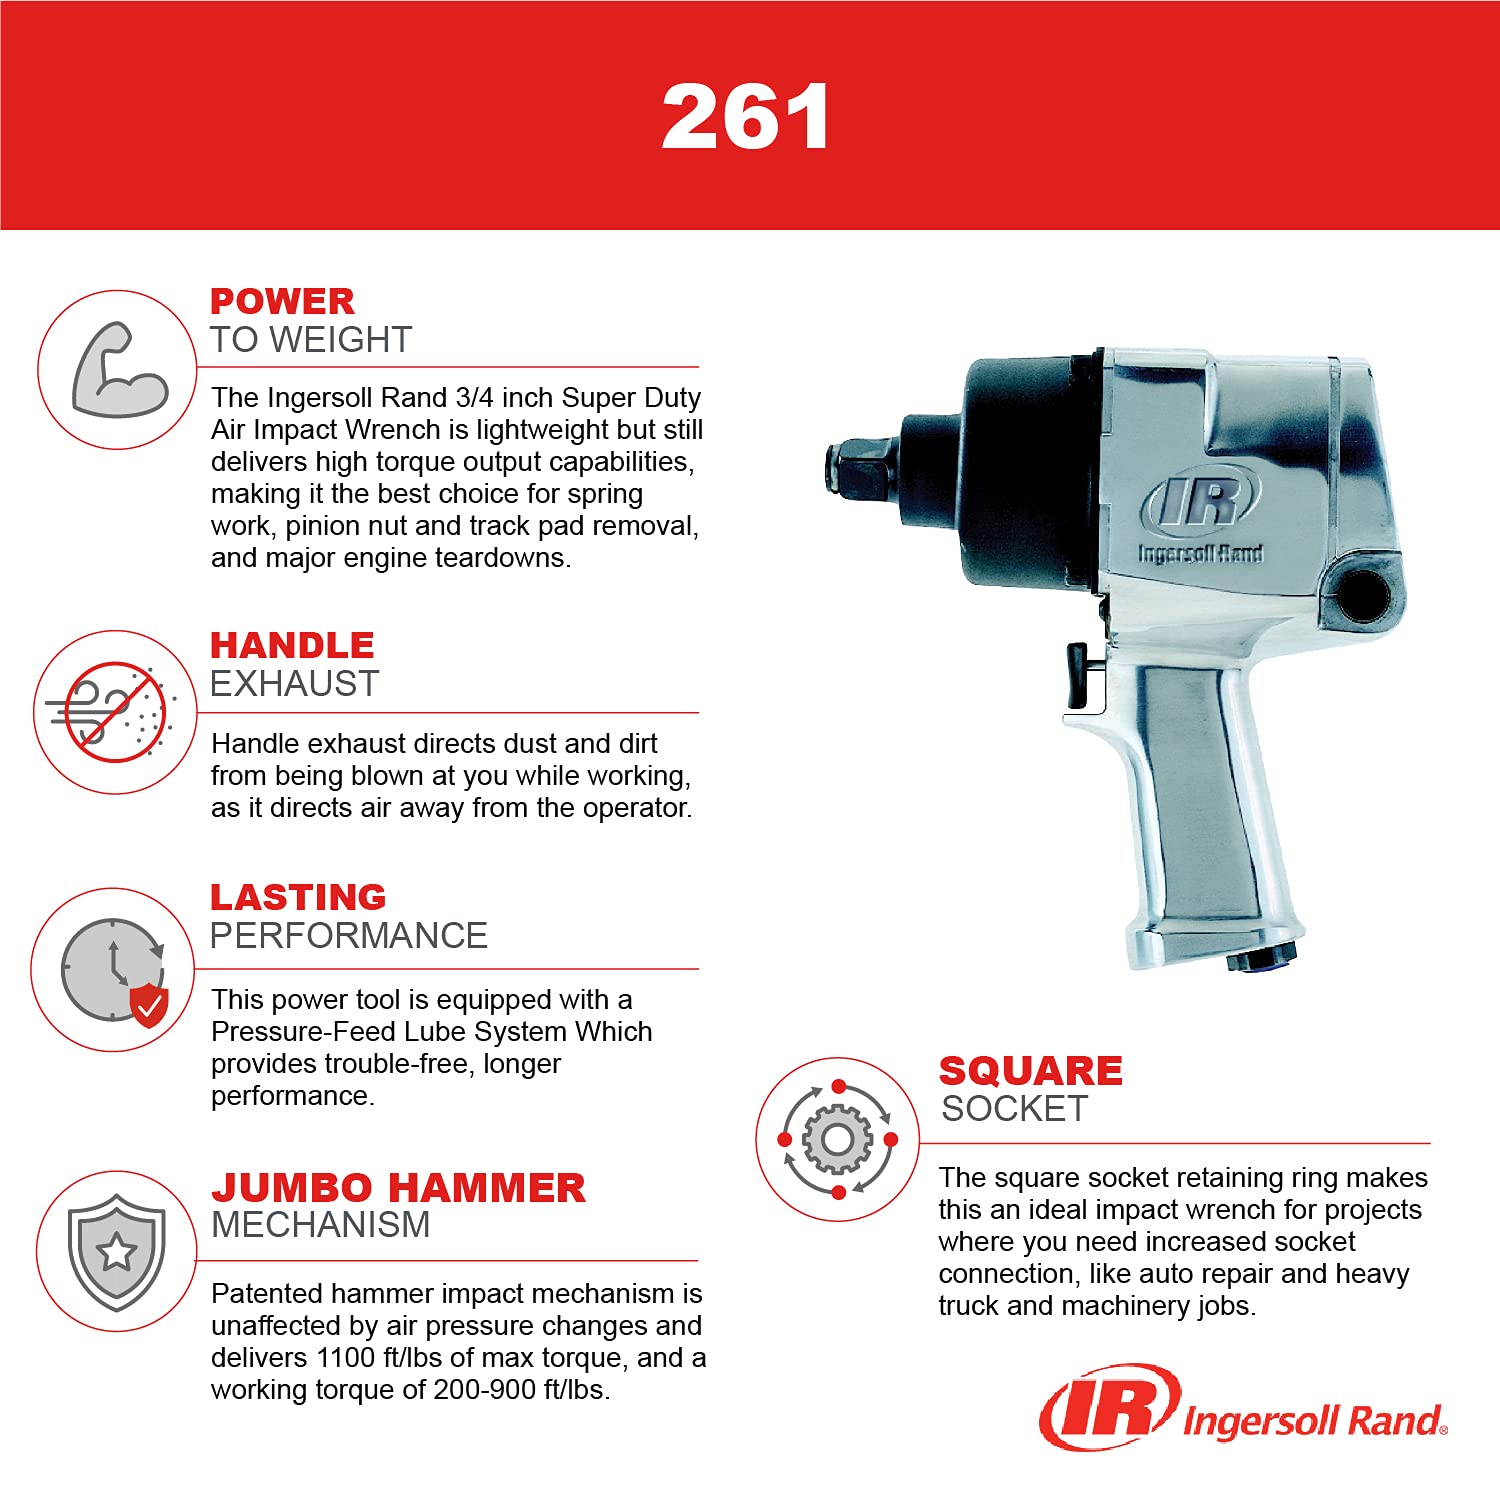 Ingersoll Rand 261 3/4-Inch Super Duty Air Impact Wrench - High Torque Output, Handle Exhaust, Pressure-Feed Lube System, Hammer Impact Mechanism, Silver